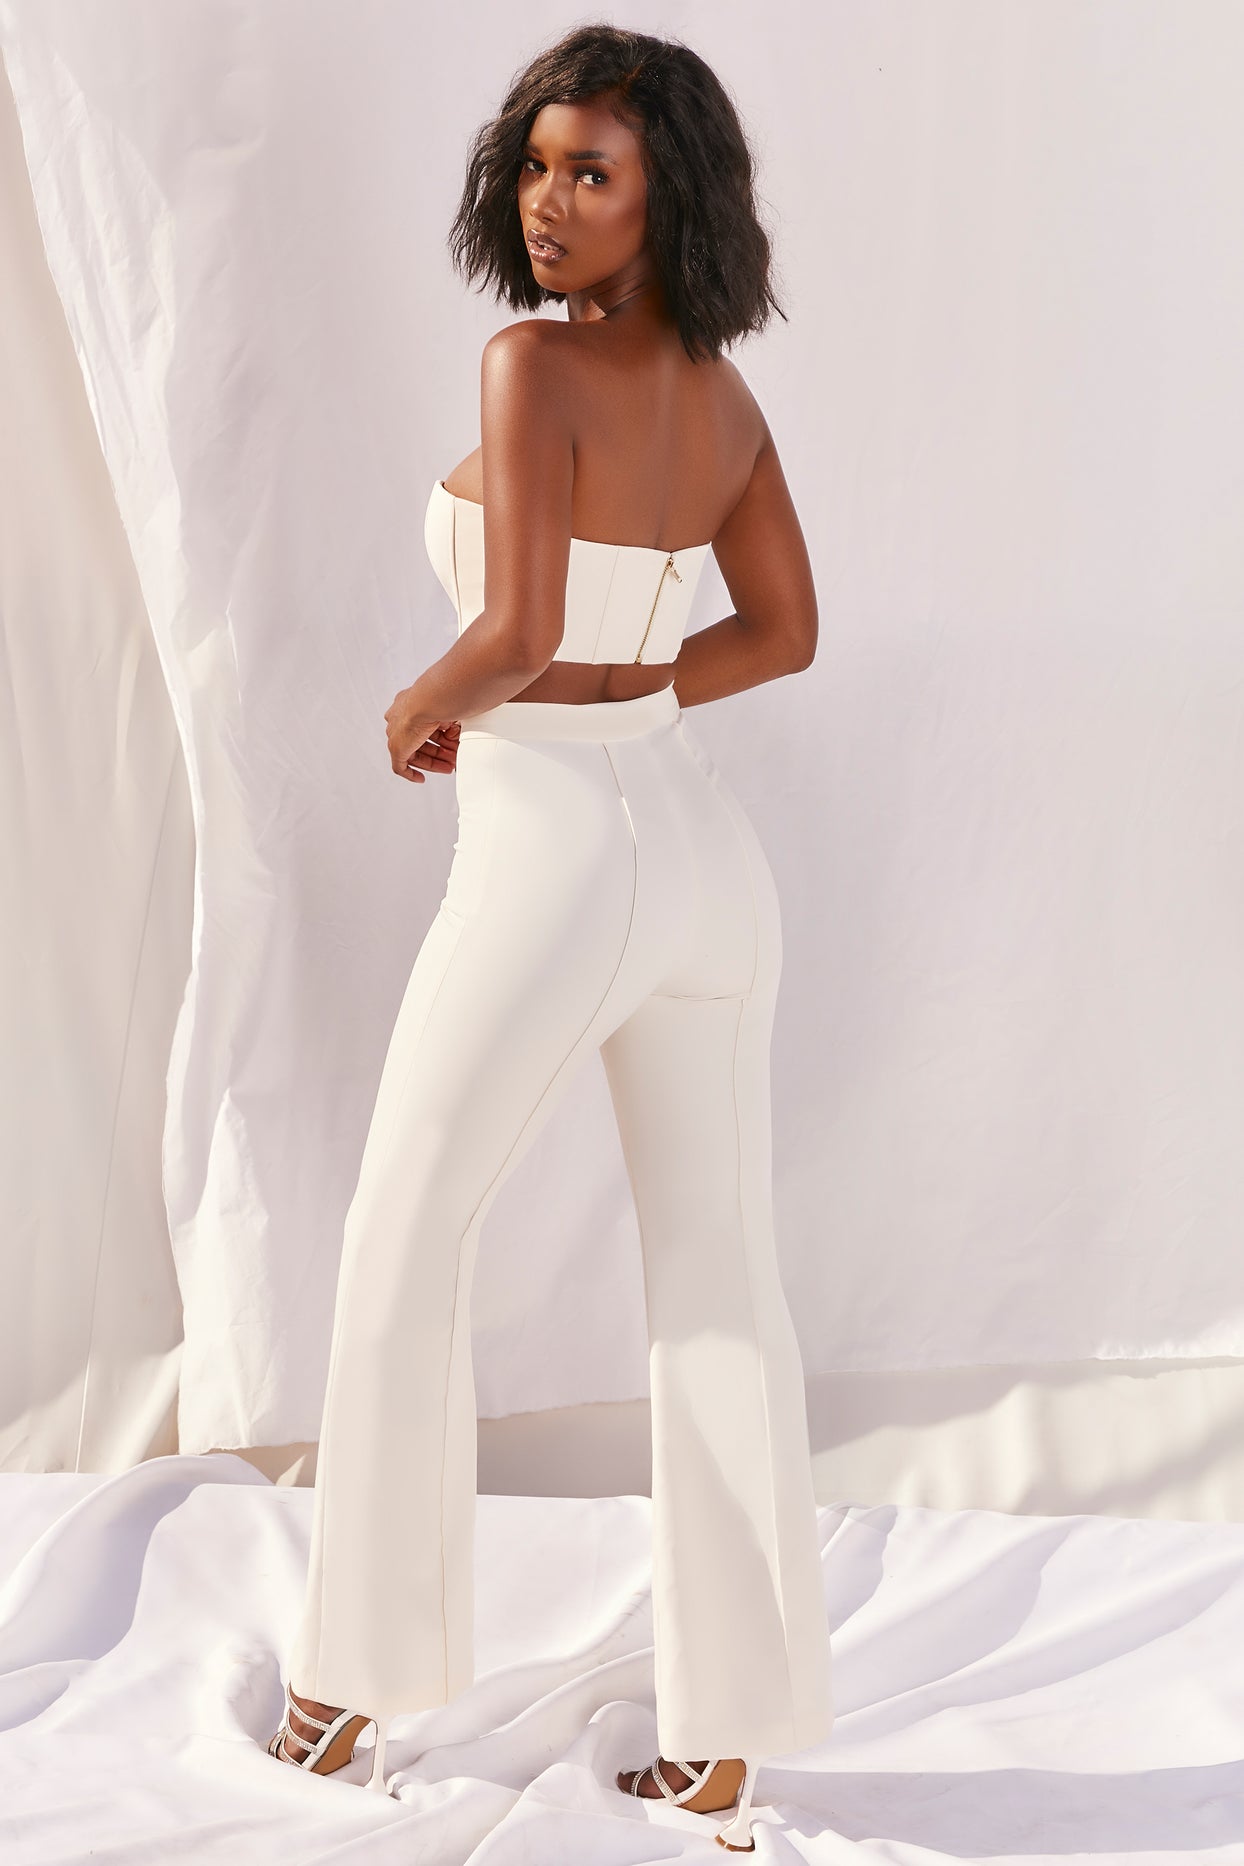 Bossin' Up Petite High Waisted Tailored Flare Leg Trousers in Ivory